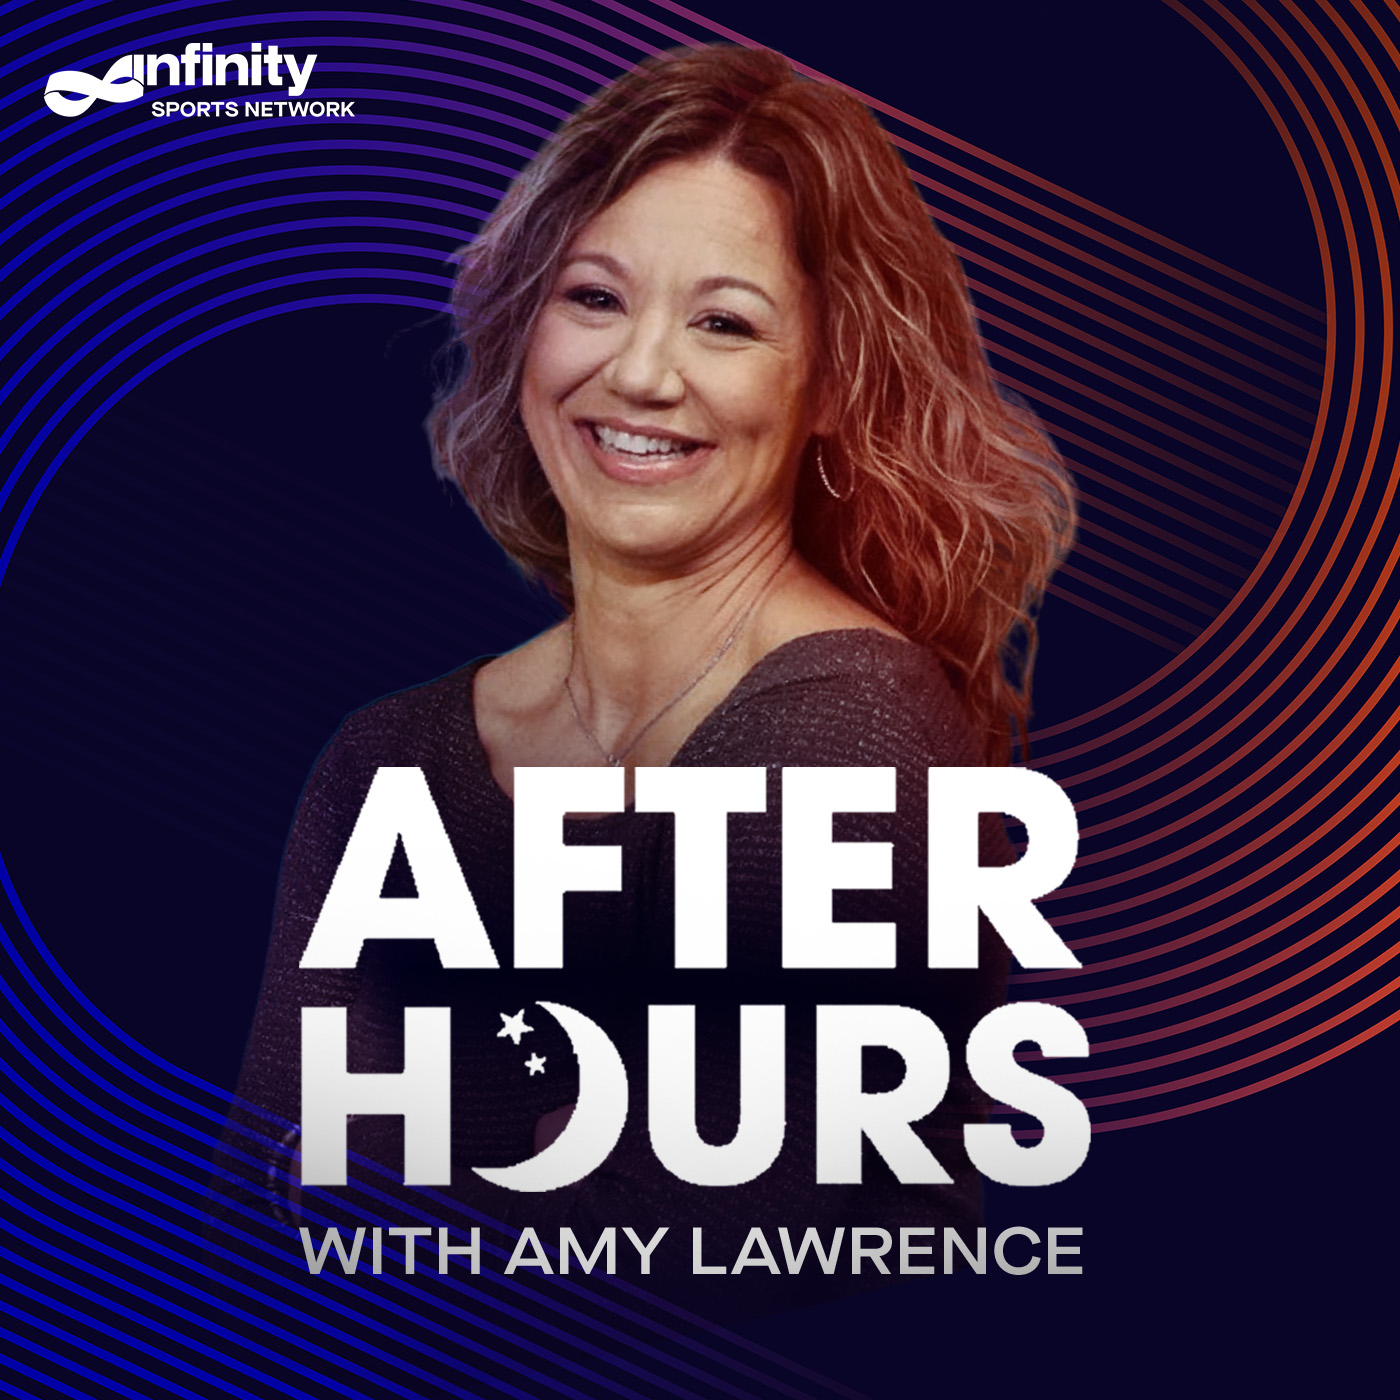 1-28-22 After Hours with Amy Lawrence PODCAST: Hour 2